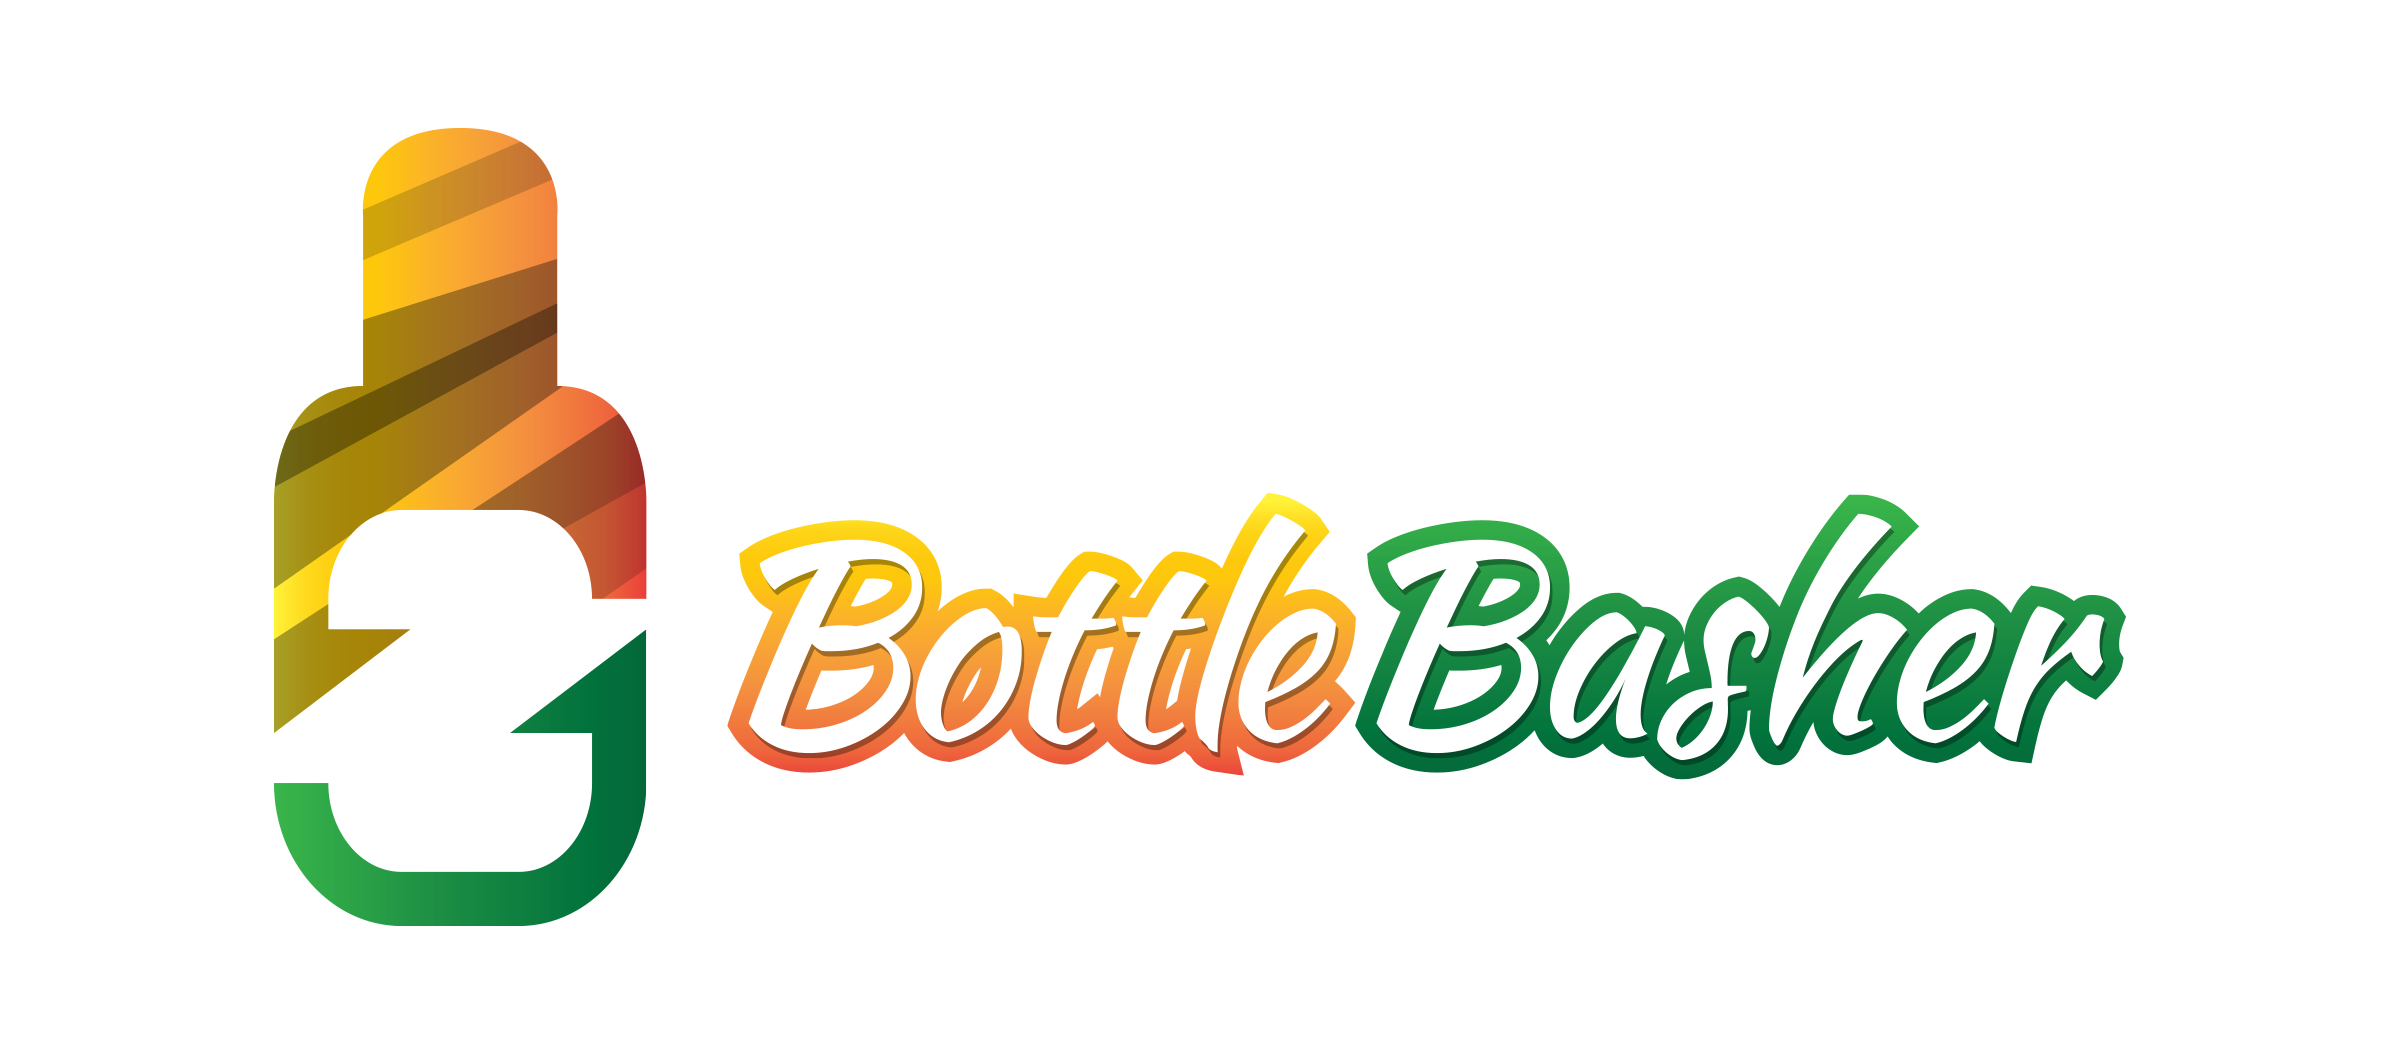 The Bottle Basher is a small device made for crushing beer bottles.